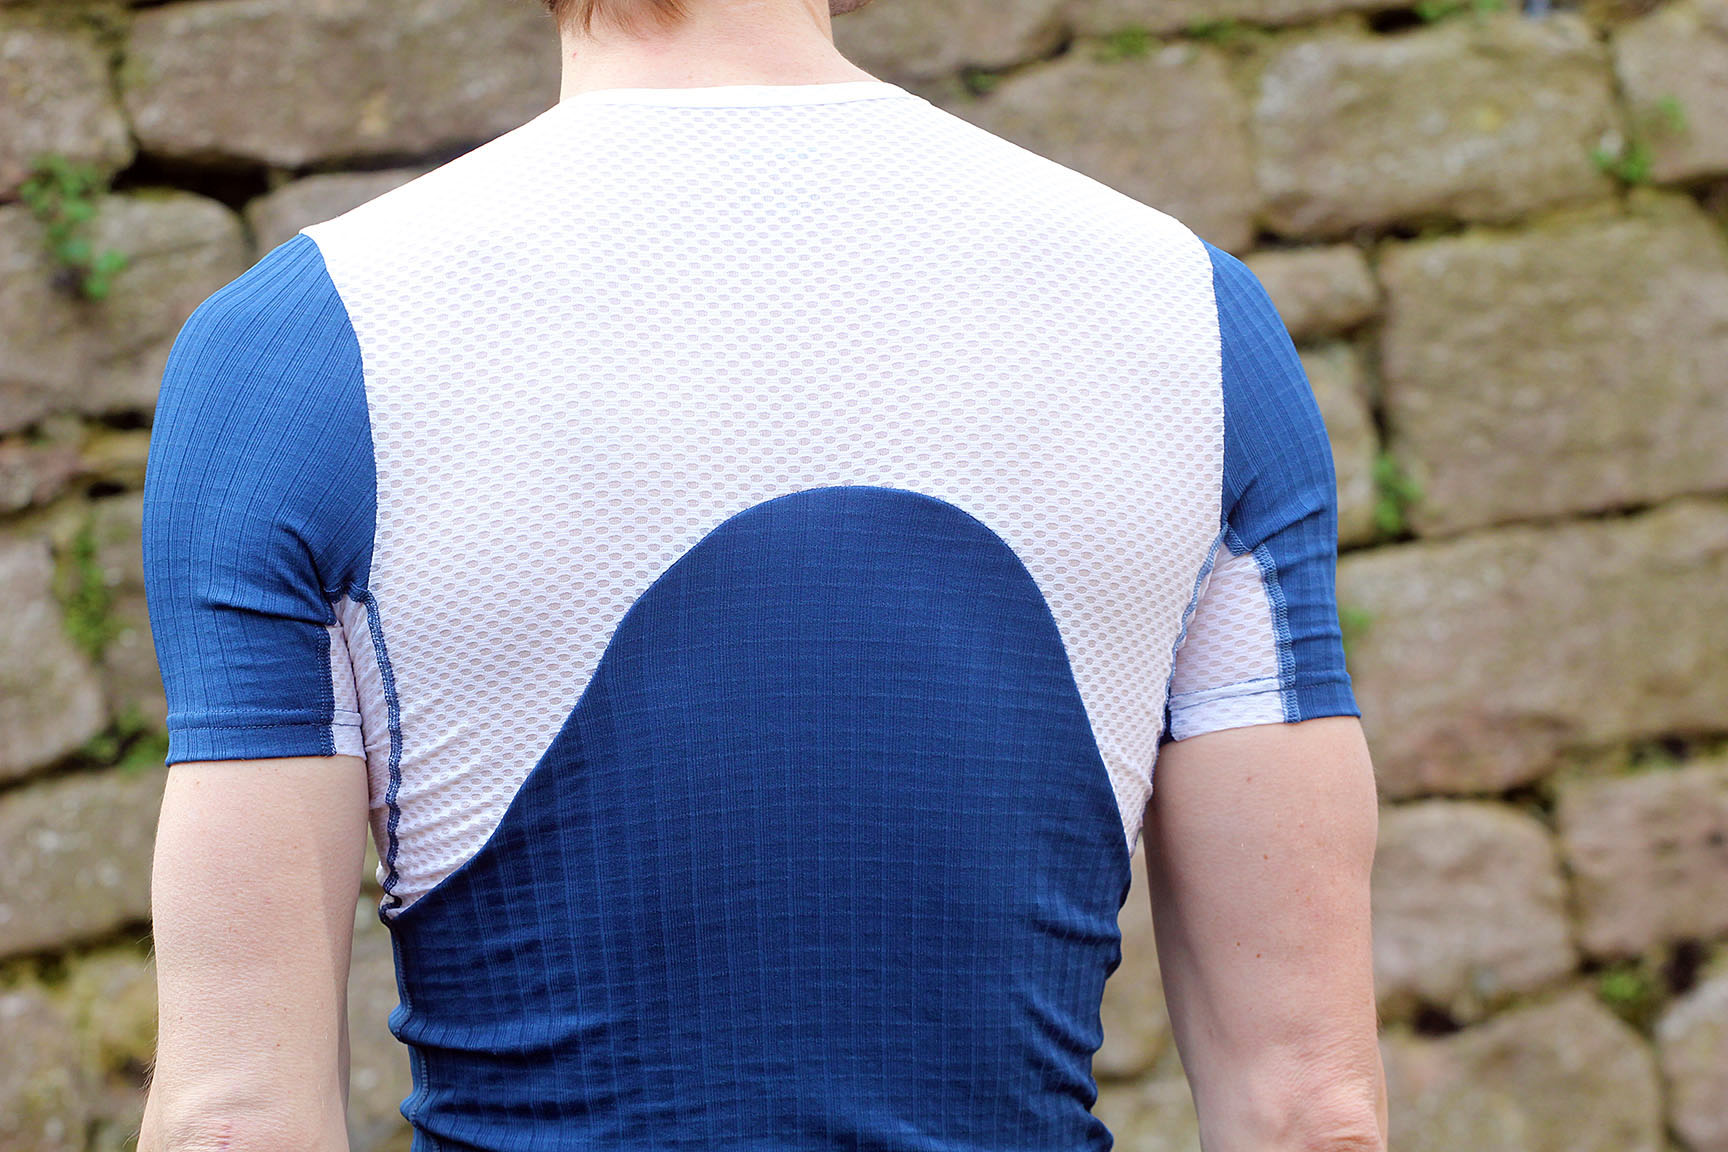 15 Of The Best Cycling Base Layers Undershirts For All Seasons for Cycling Base Layer Benefits